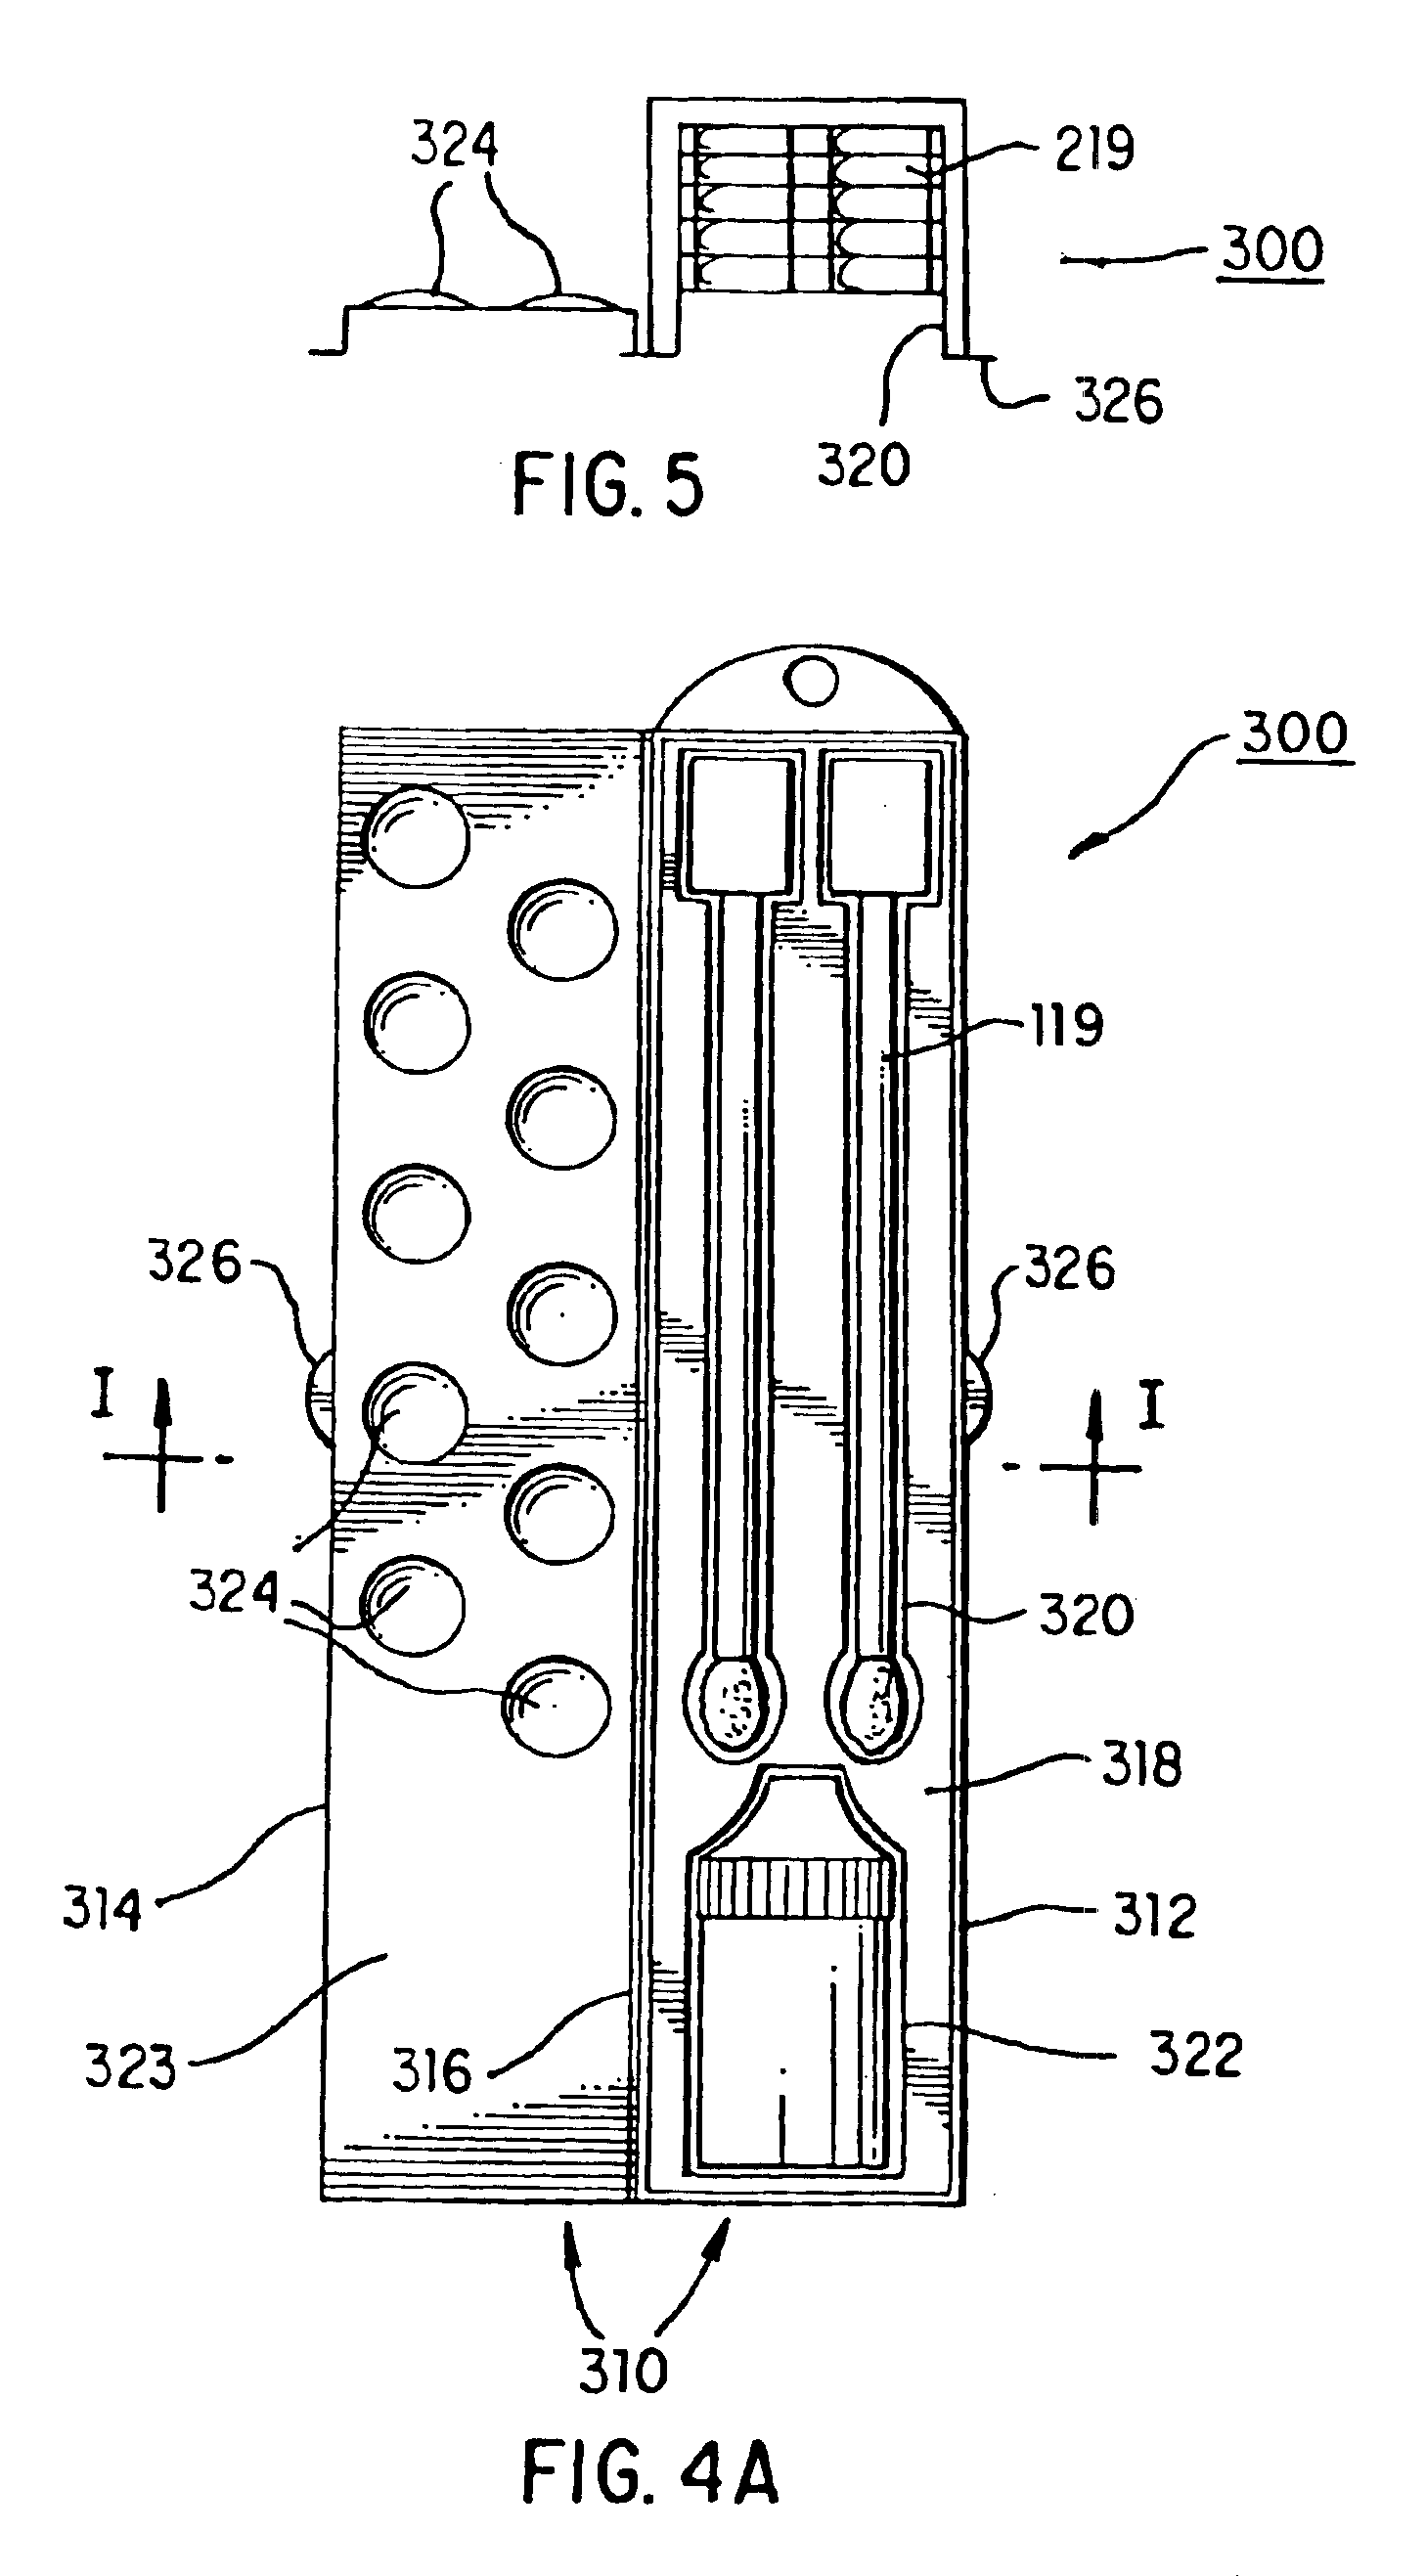 Package assembly with applicator and container for adhesive materials